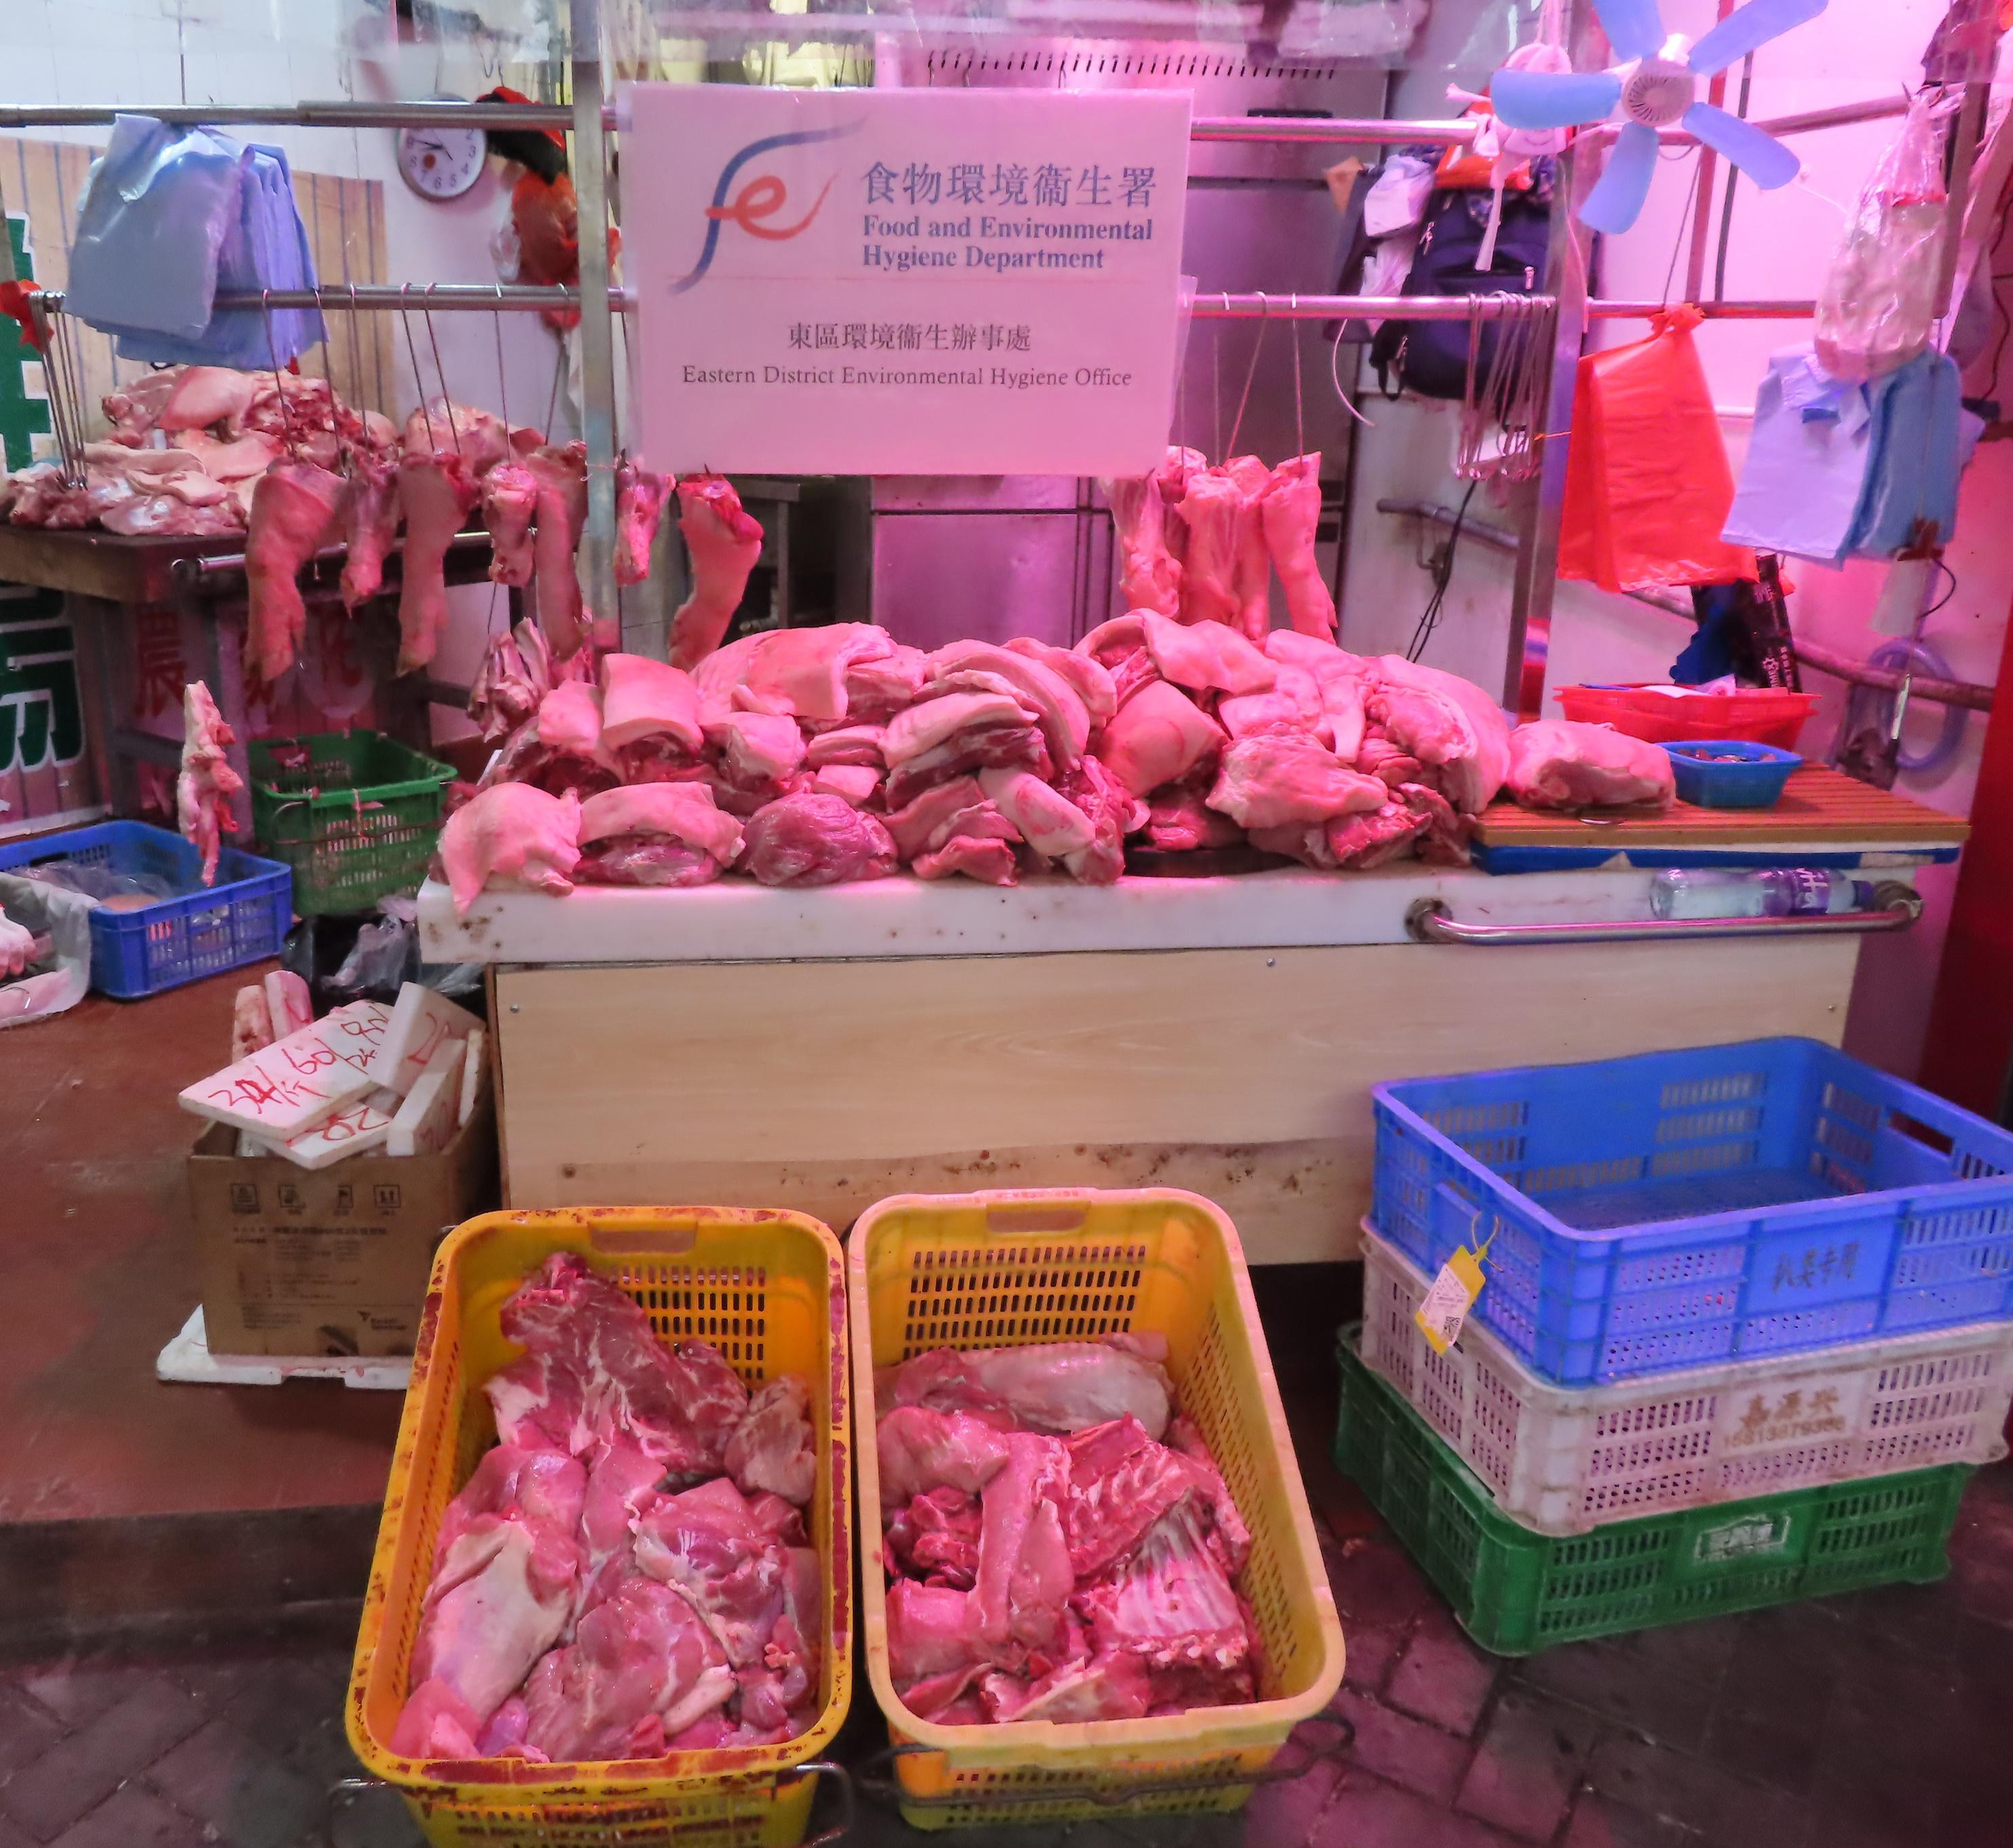 The Food and Environmental Hygiene Department (FEHD) in a blitz operation today (June 8) raided a licensed fresh provision shop in the Chai Wan district suspected of selling chilled meat as fresh meat. Photo shows the meat found by FEHD officers during the operation.